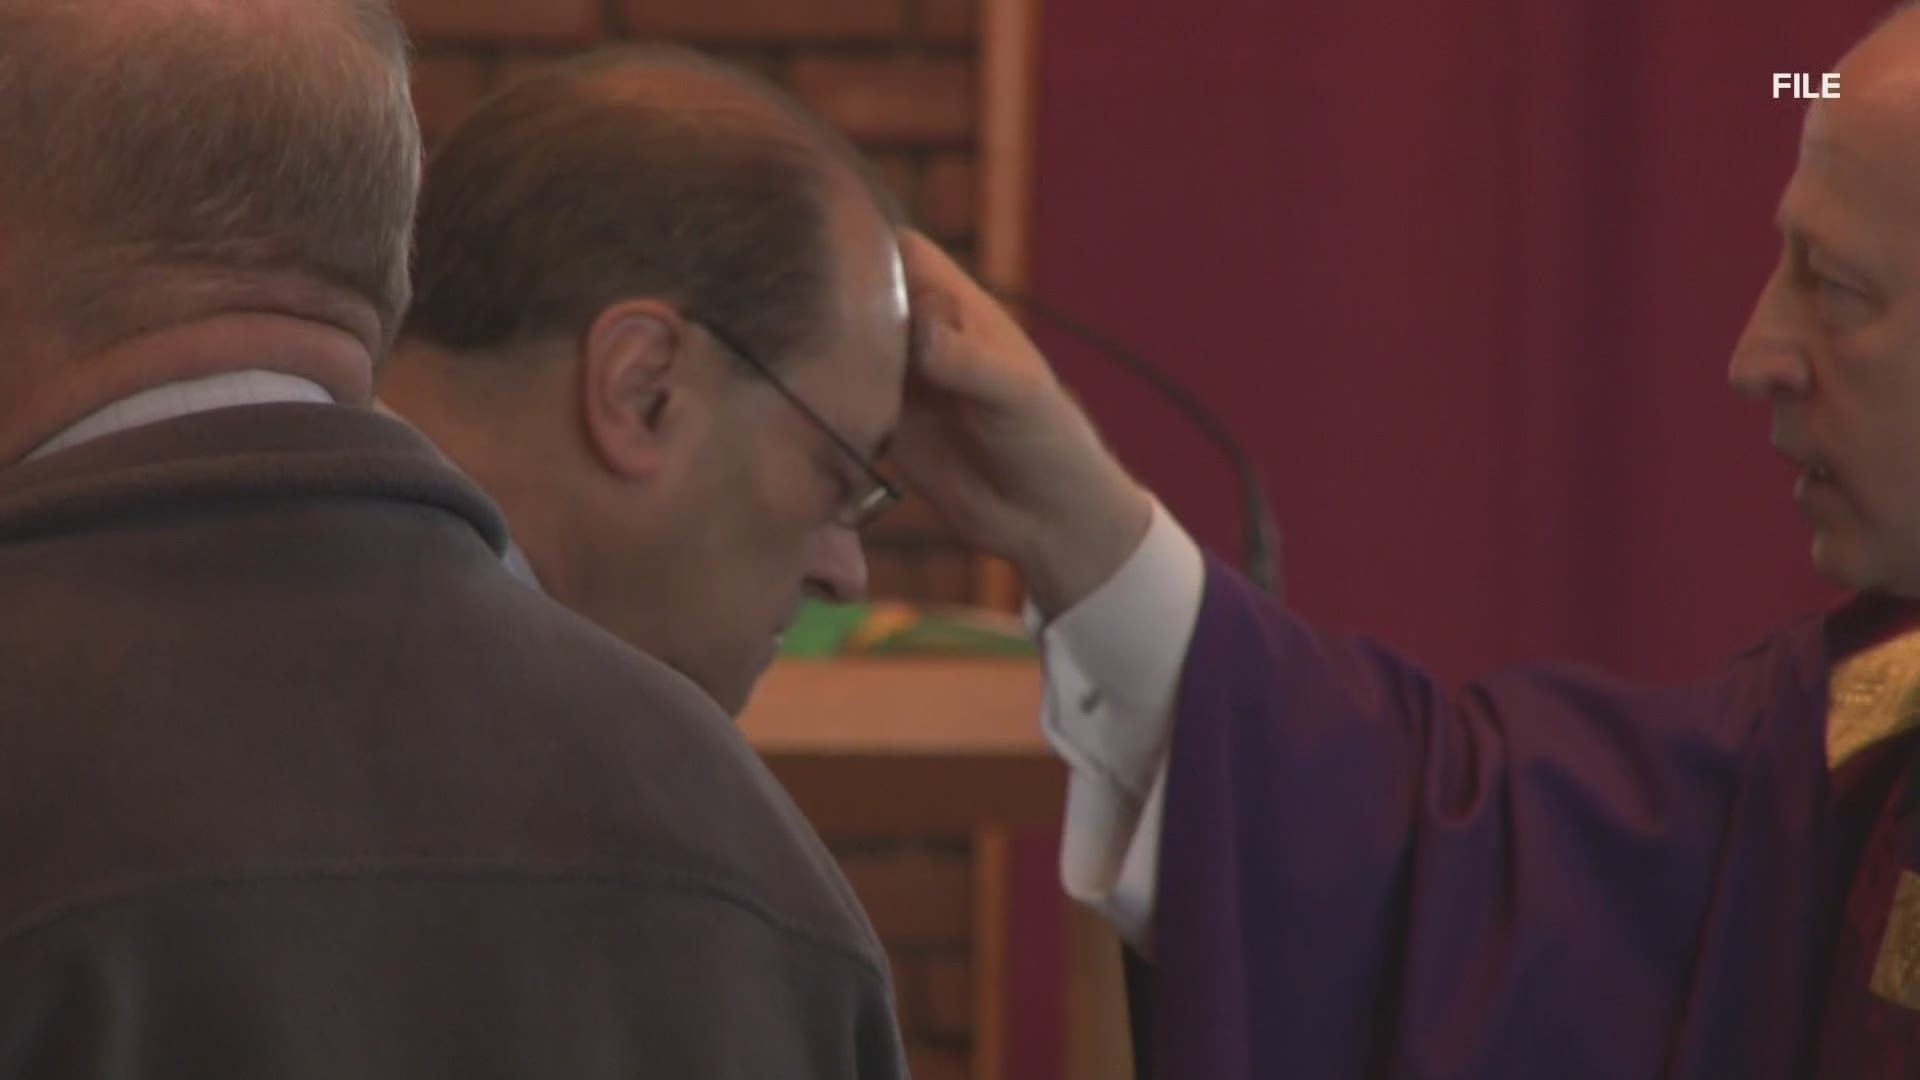 Safety measures are in place at churches across Maine on Ash Wednesday, which marks the start of Lent.